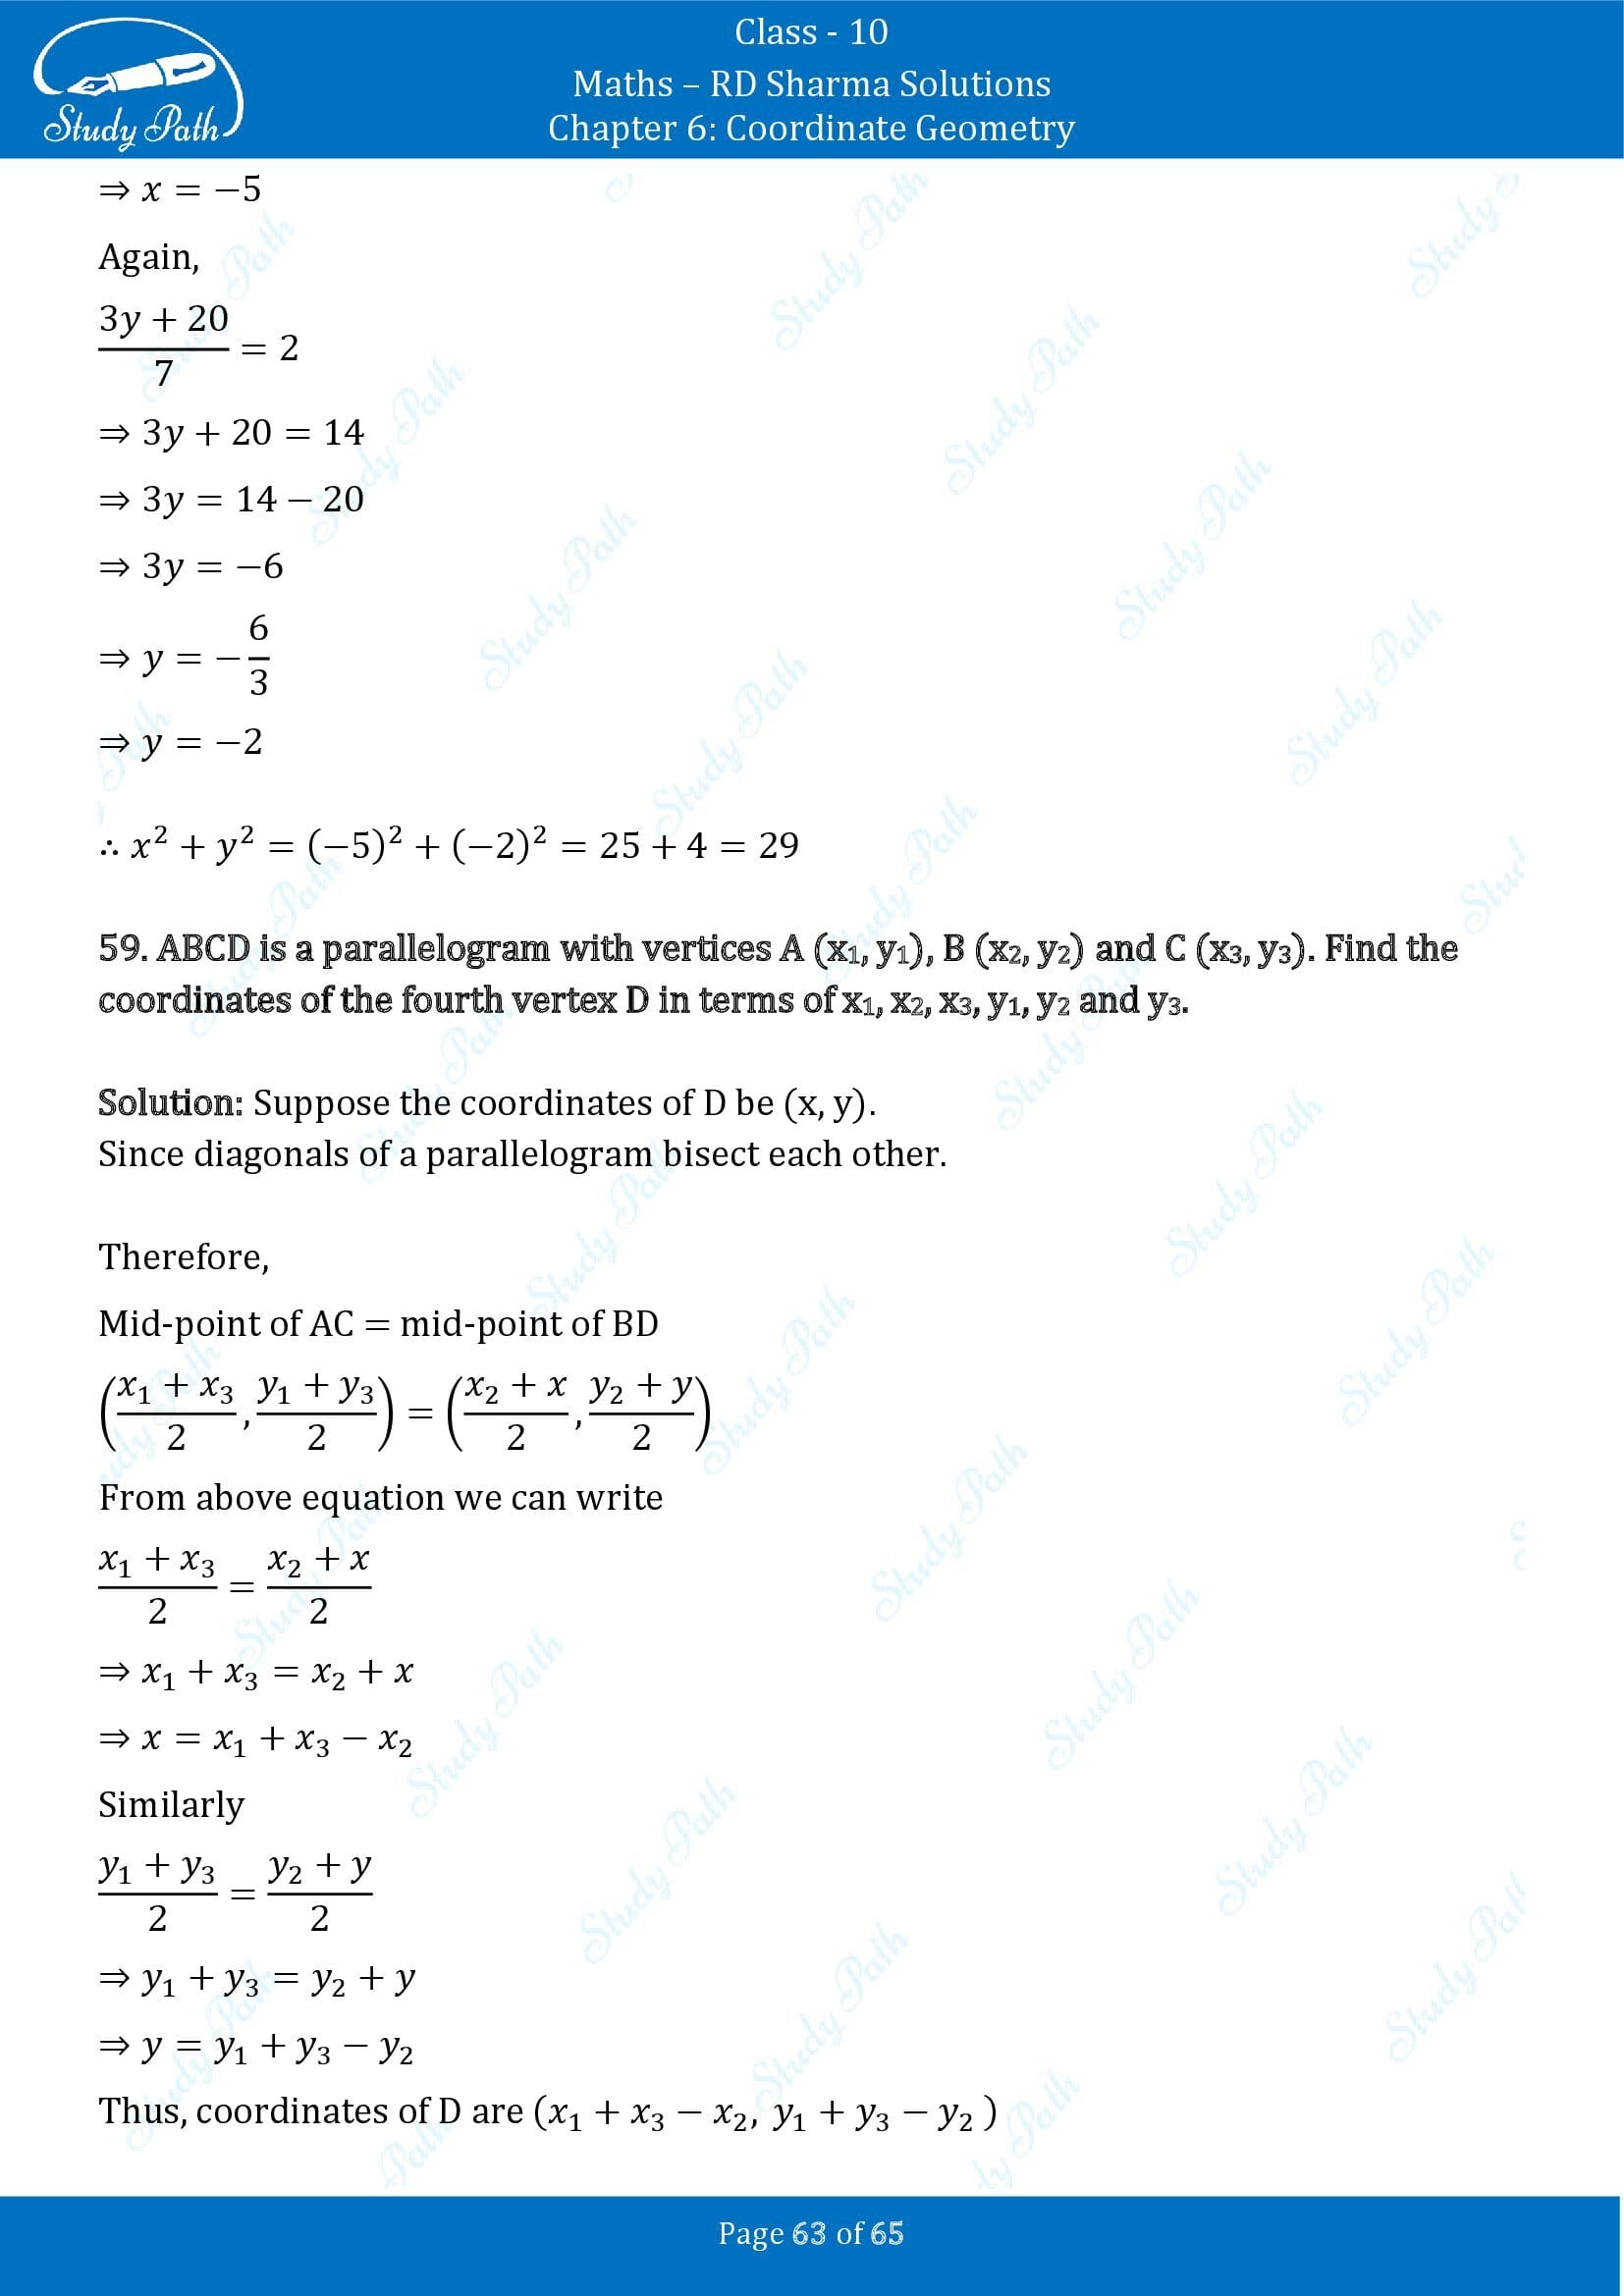 RD Sharma Solutions Class 10 Chapter 6 Coordinate Geometry Exercise 6.3 00063